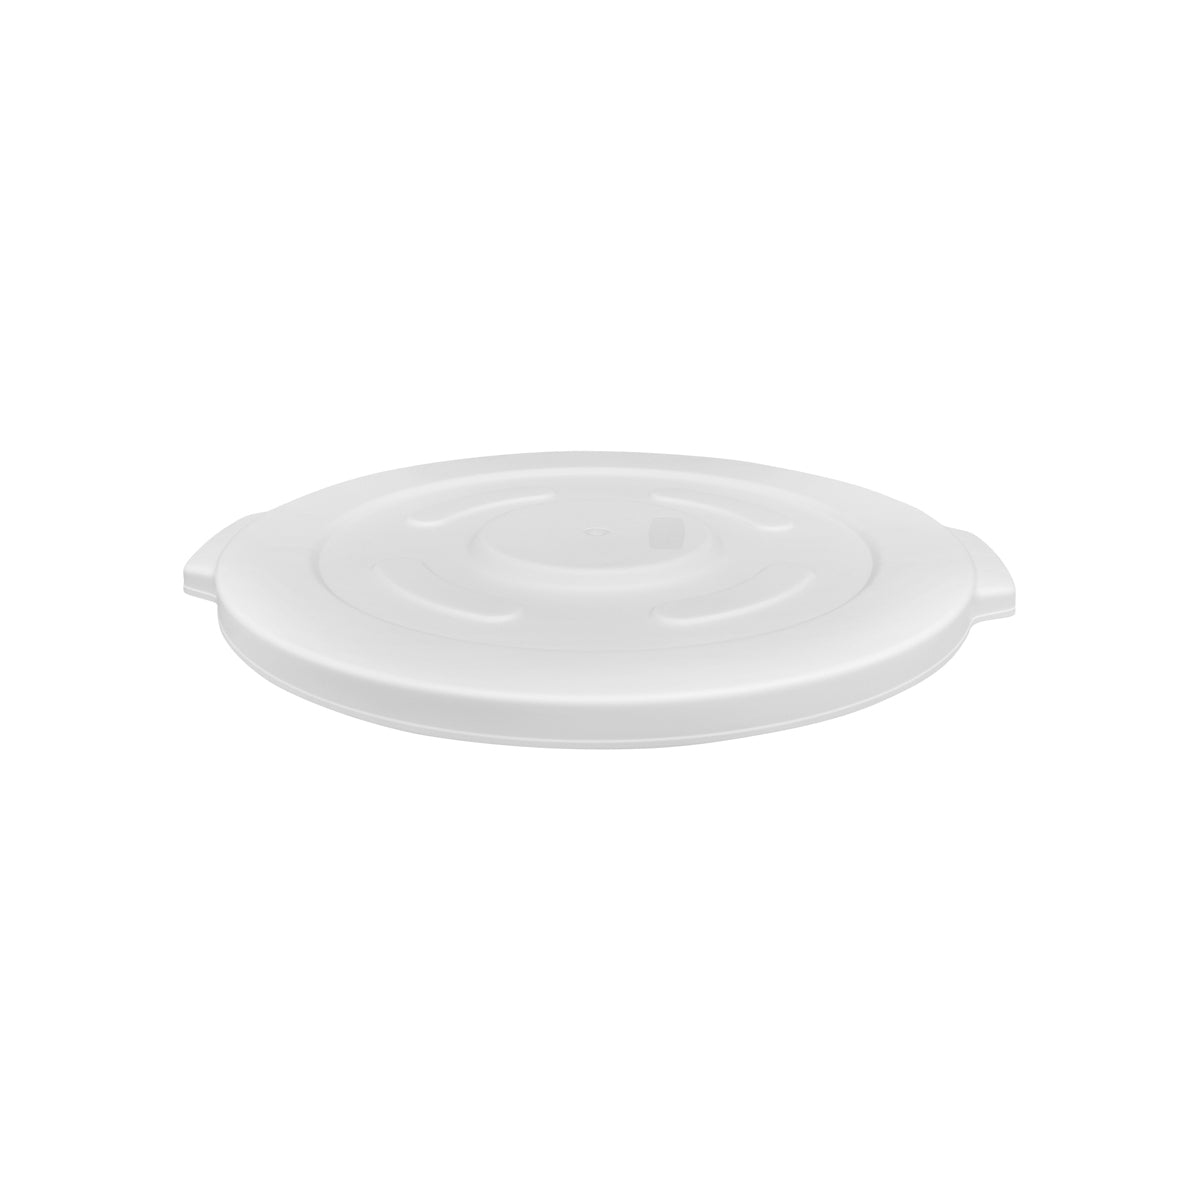 JW-CRC3P (WHITE) Jiwins Lid to Suit 121Lt Round Ingredient Container Tomkin Australia Hospitality Supplies